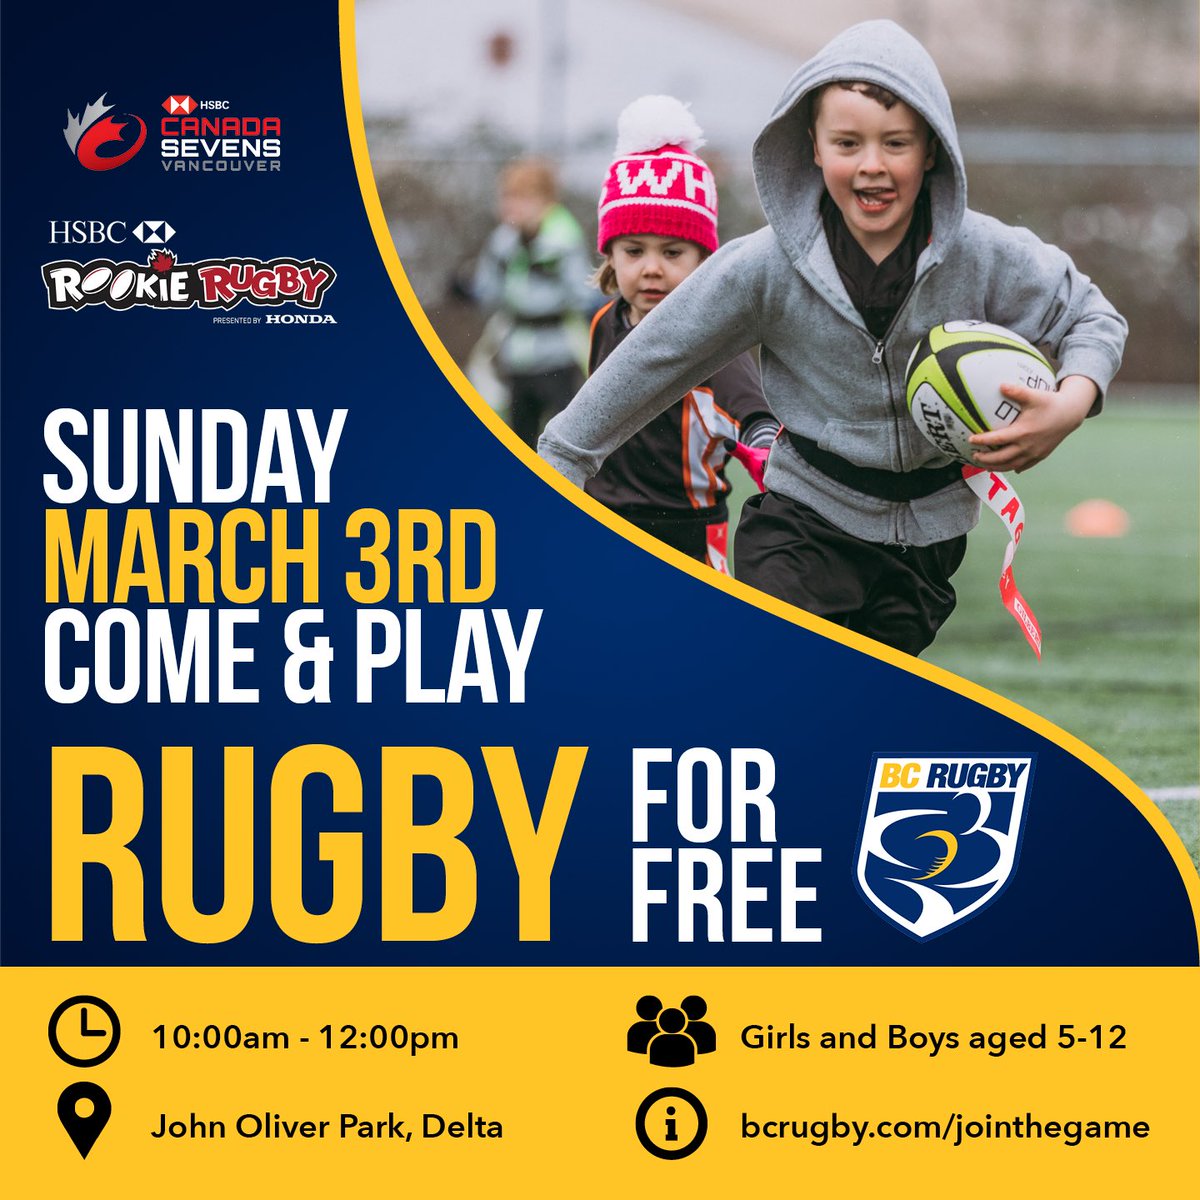 We hope to see you March 3rd to try rugby with HSBC Canada Sevens! 

#rugby #bcrugby #rugbycanada #rookierugby #kidsrugby #rugby7s #hsbcsevens #hsbcrookierugby #sports #fitness #activity #vancouver #delta #bc #canada